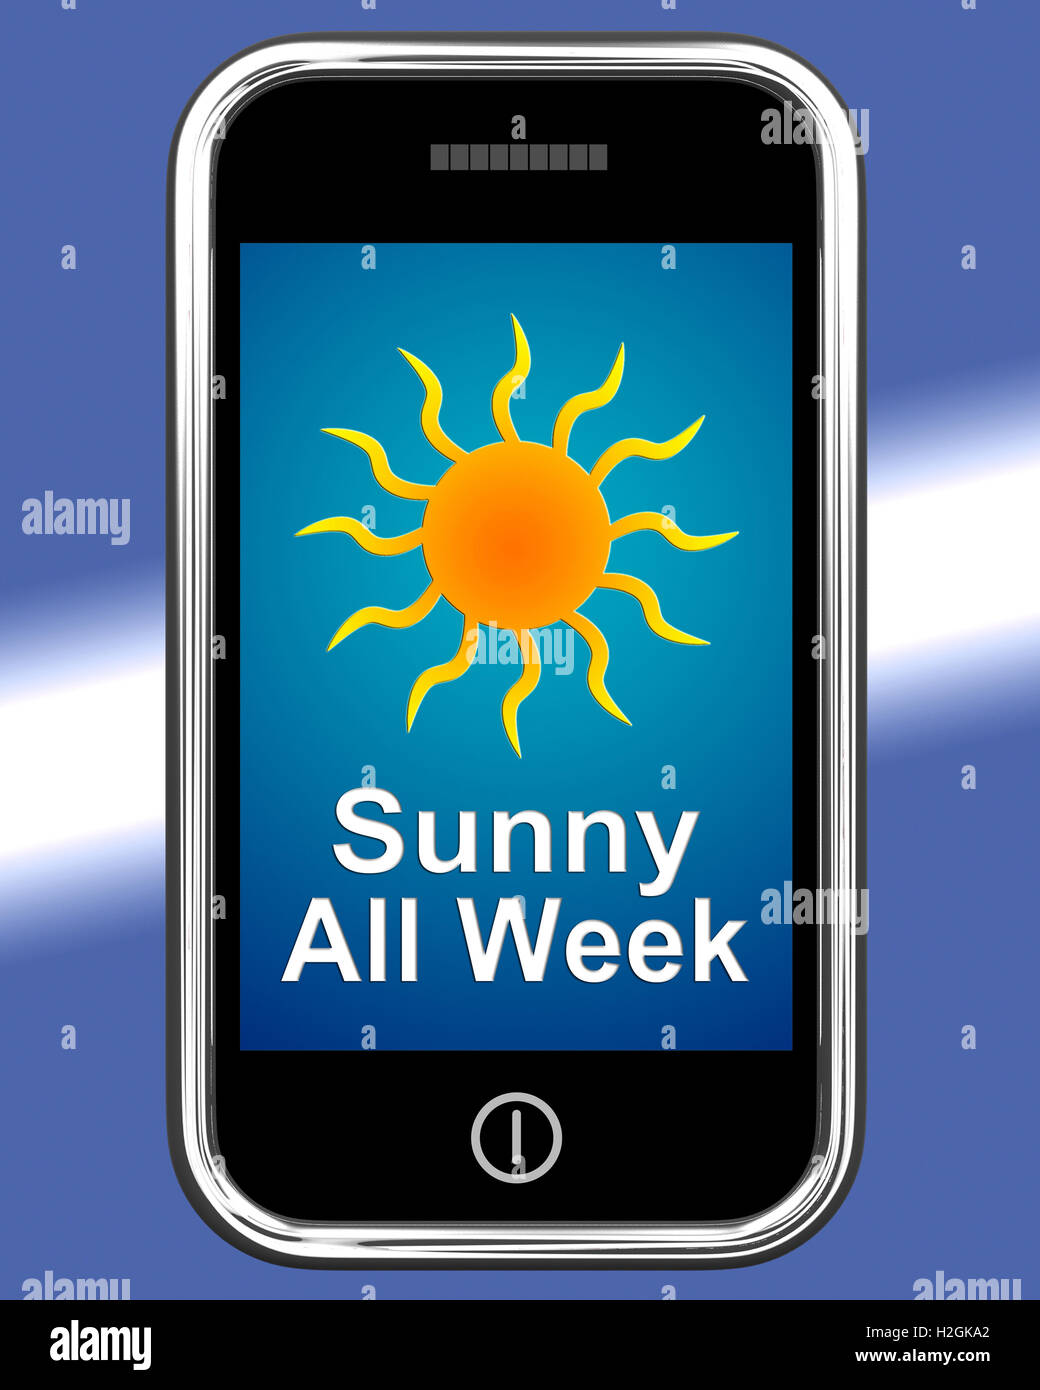 Sunny All Week On Phone Means Hot Weather Stock Photo